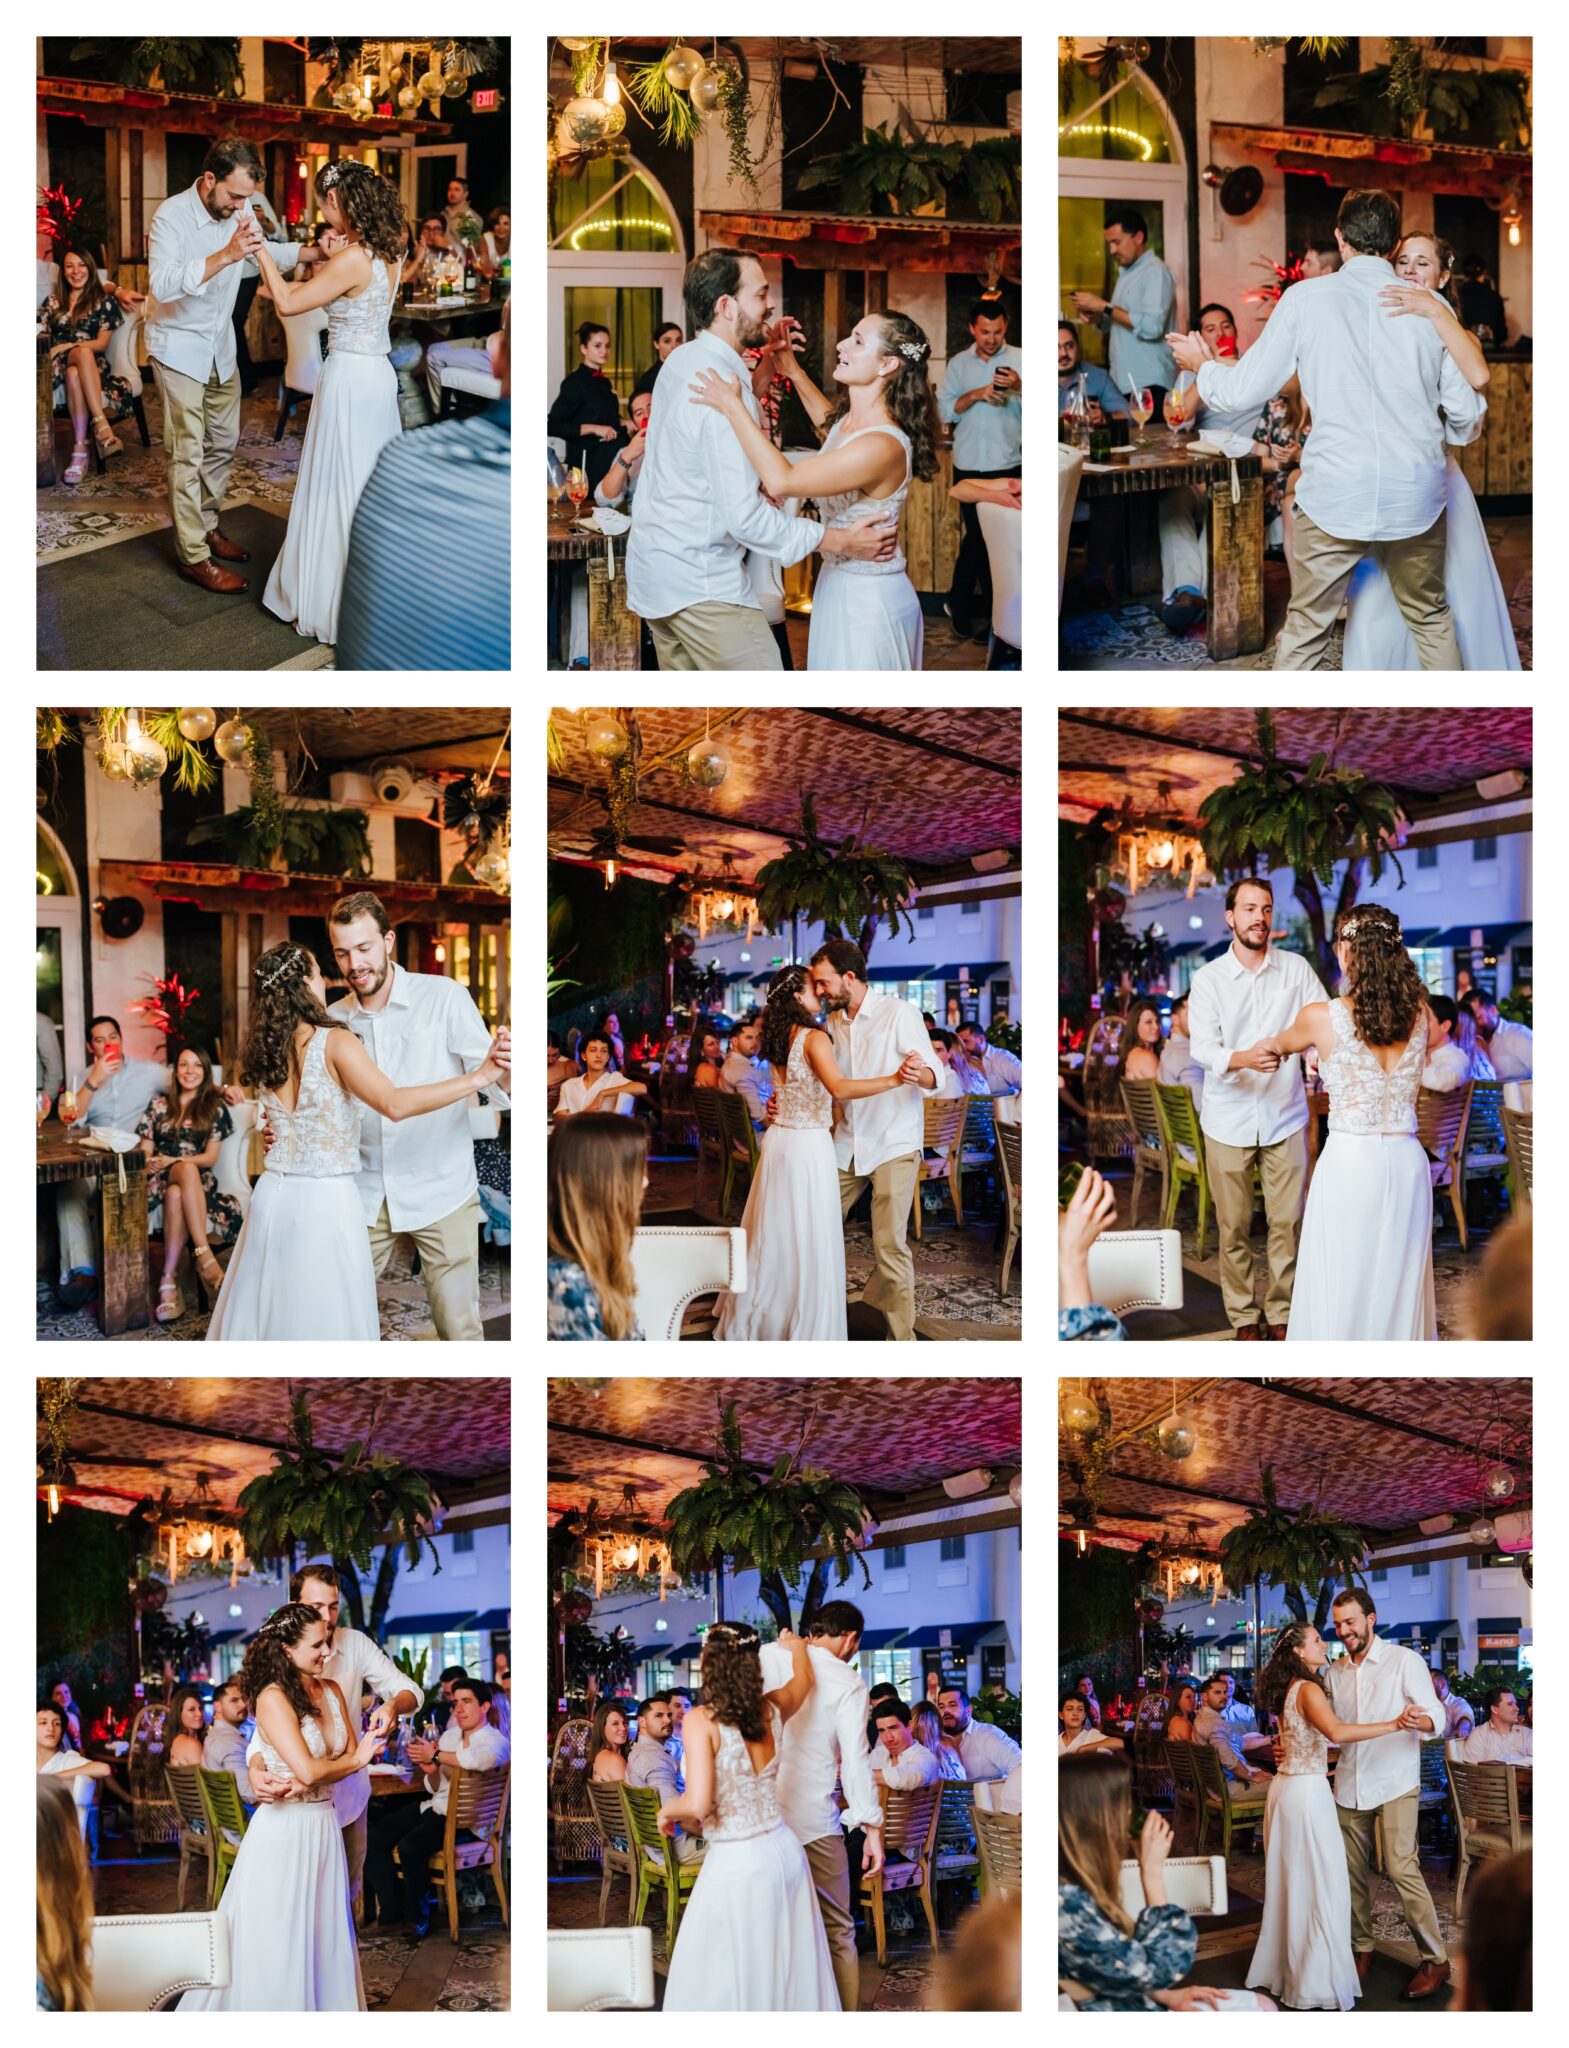 A collage of the bride and groom's first dance moves